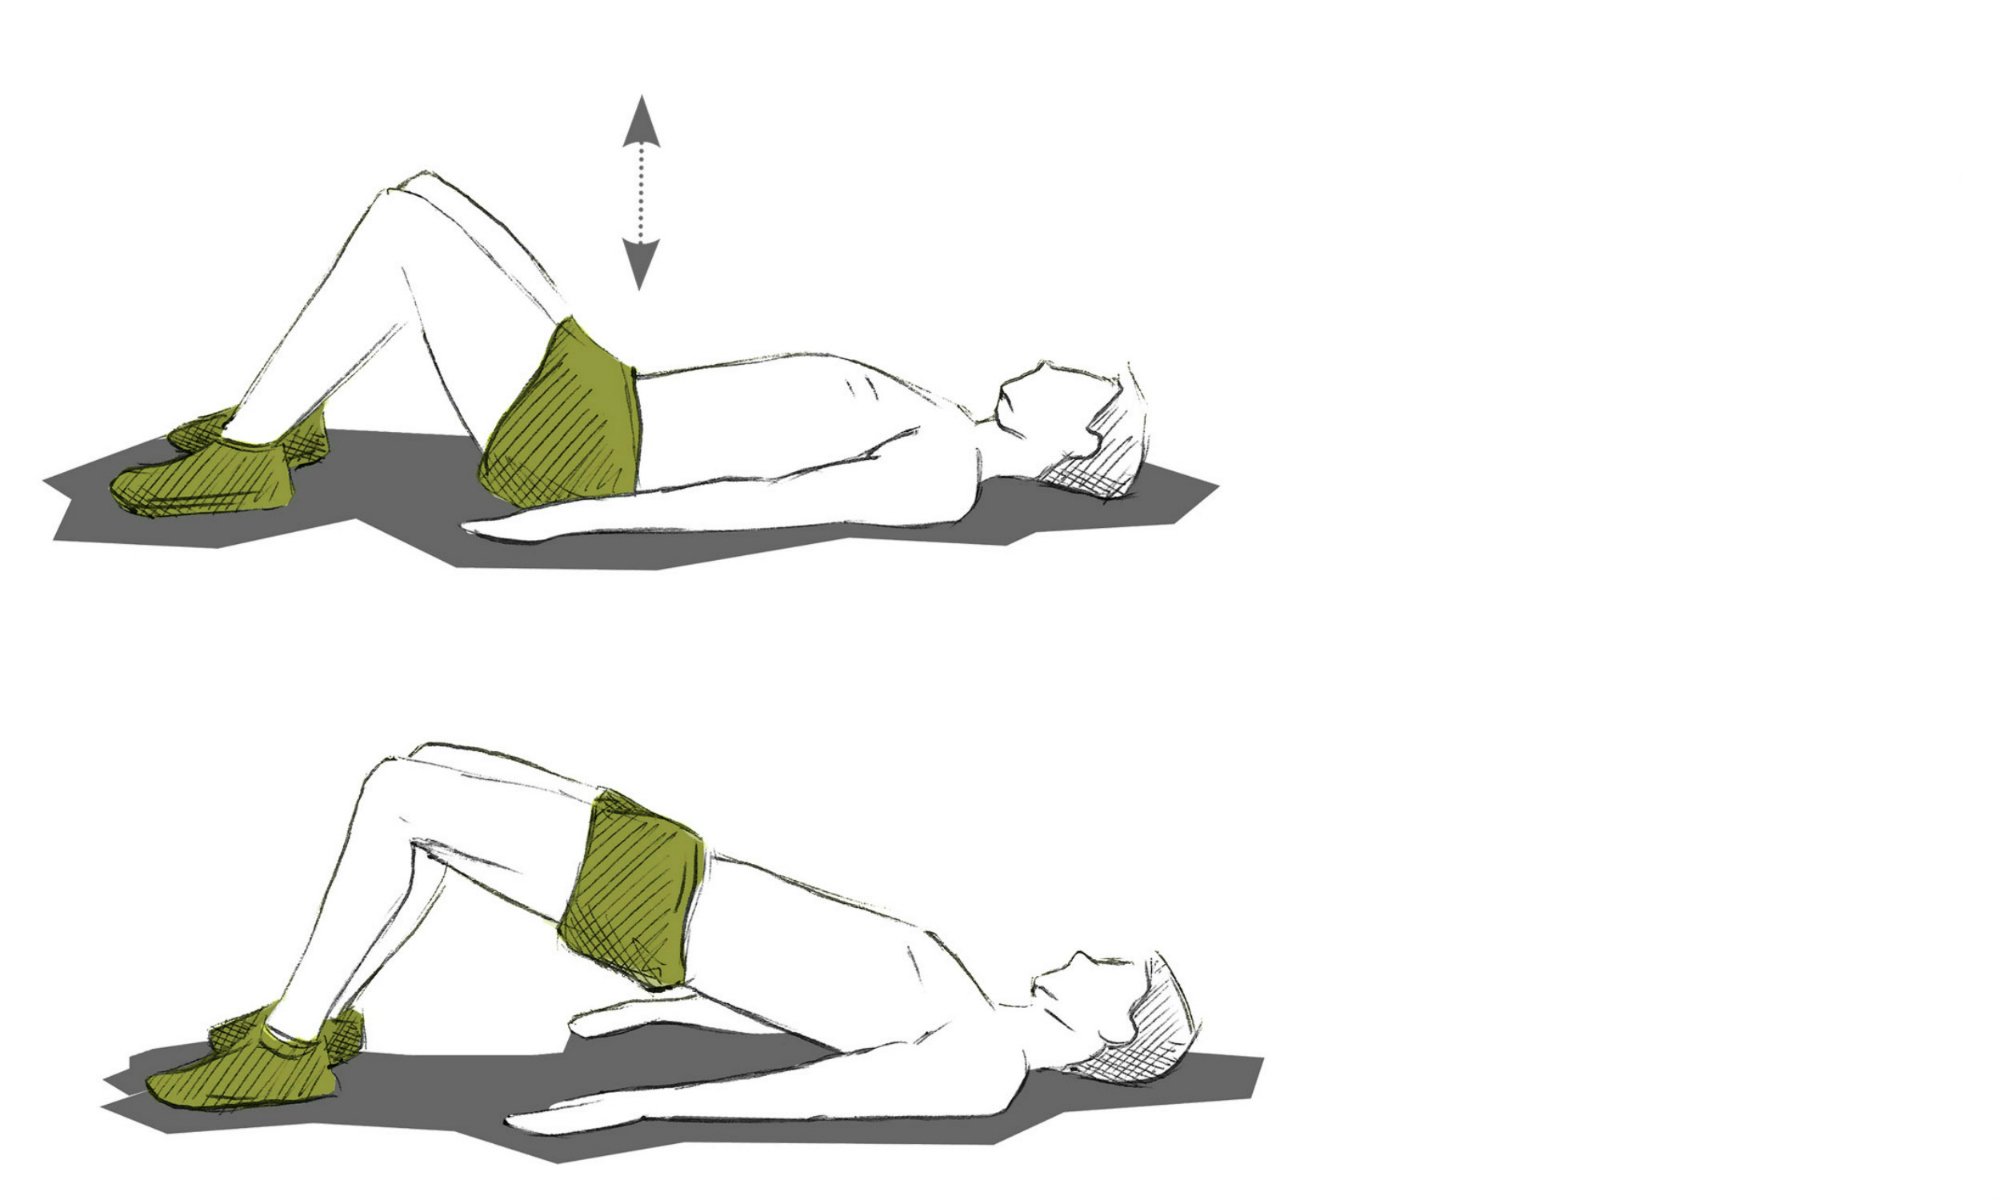 The pelvic lift exercise.